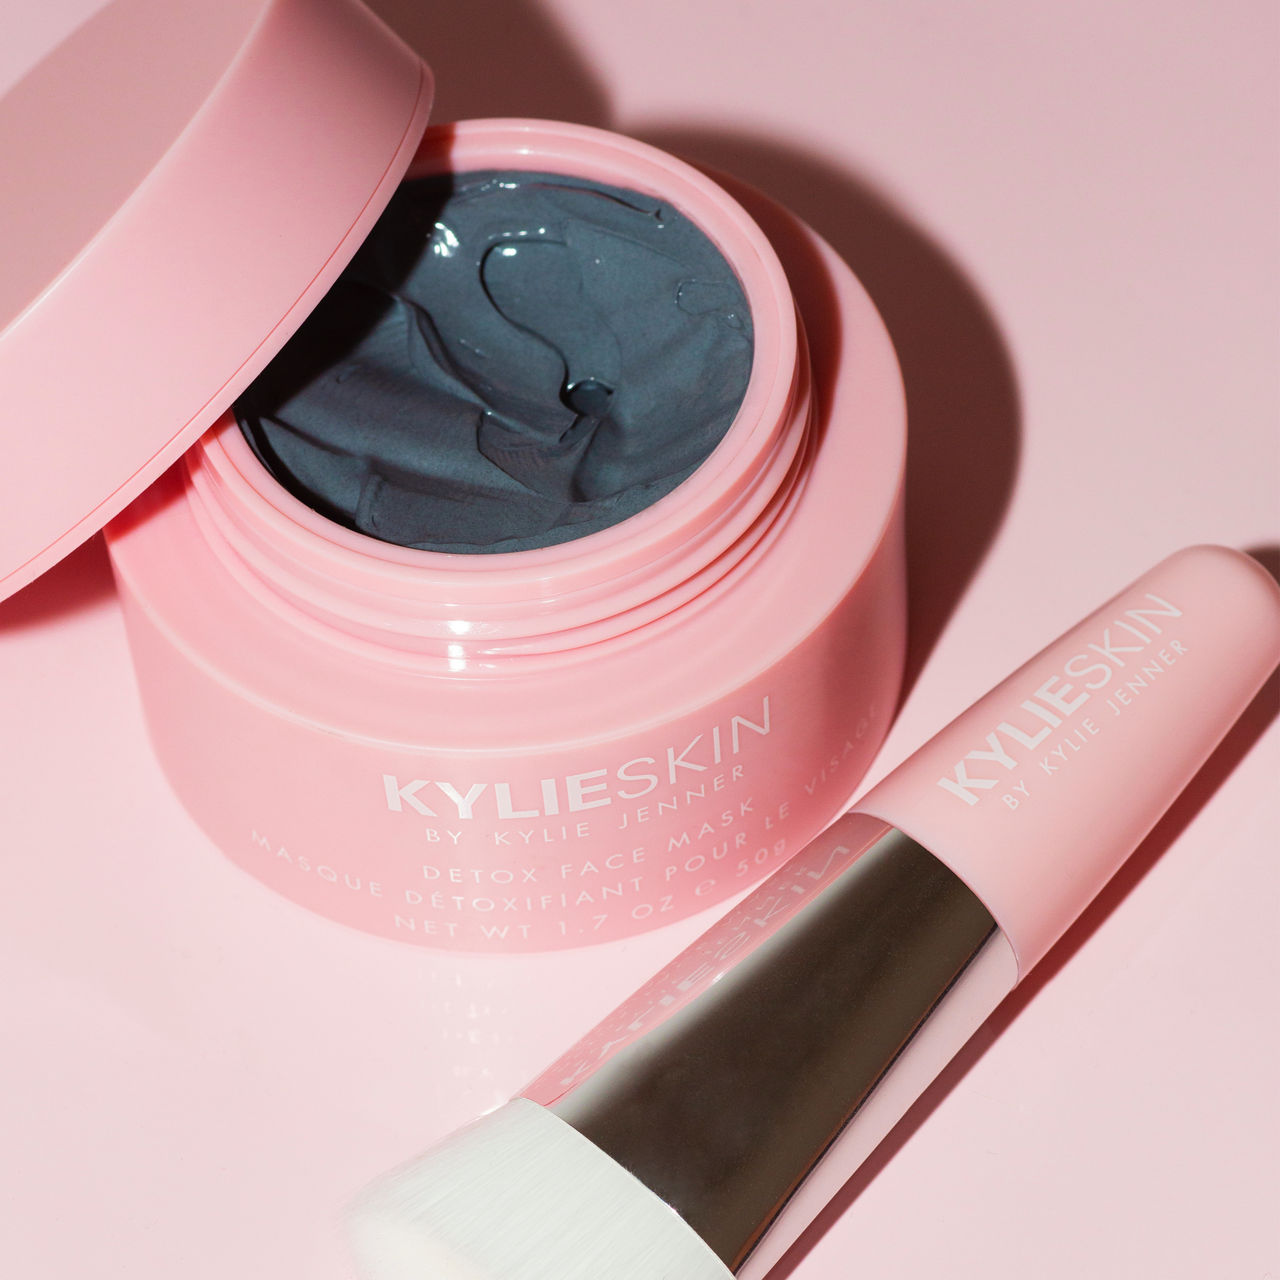 Detox Face Mask  Kylie Skin by Kylie Jenner – Kylie Cosmetics